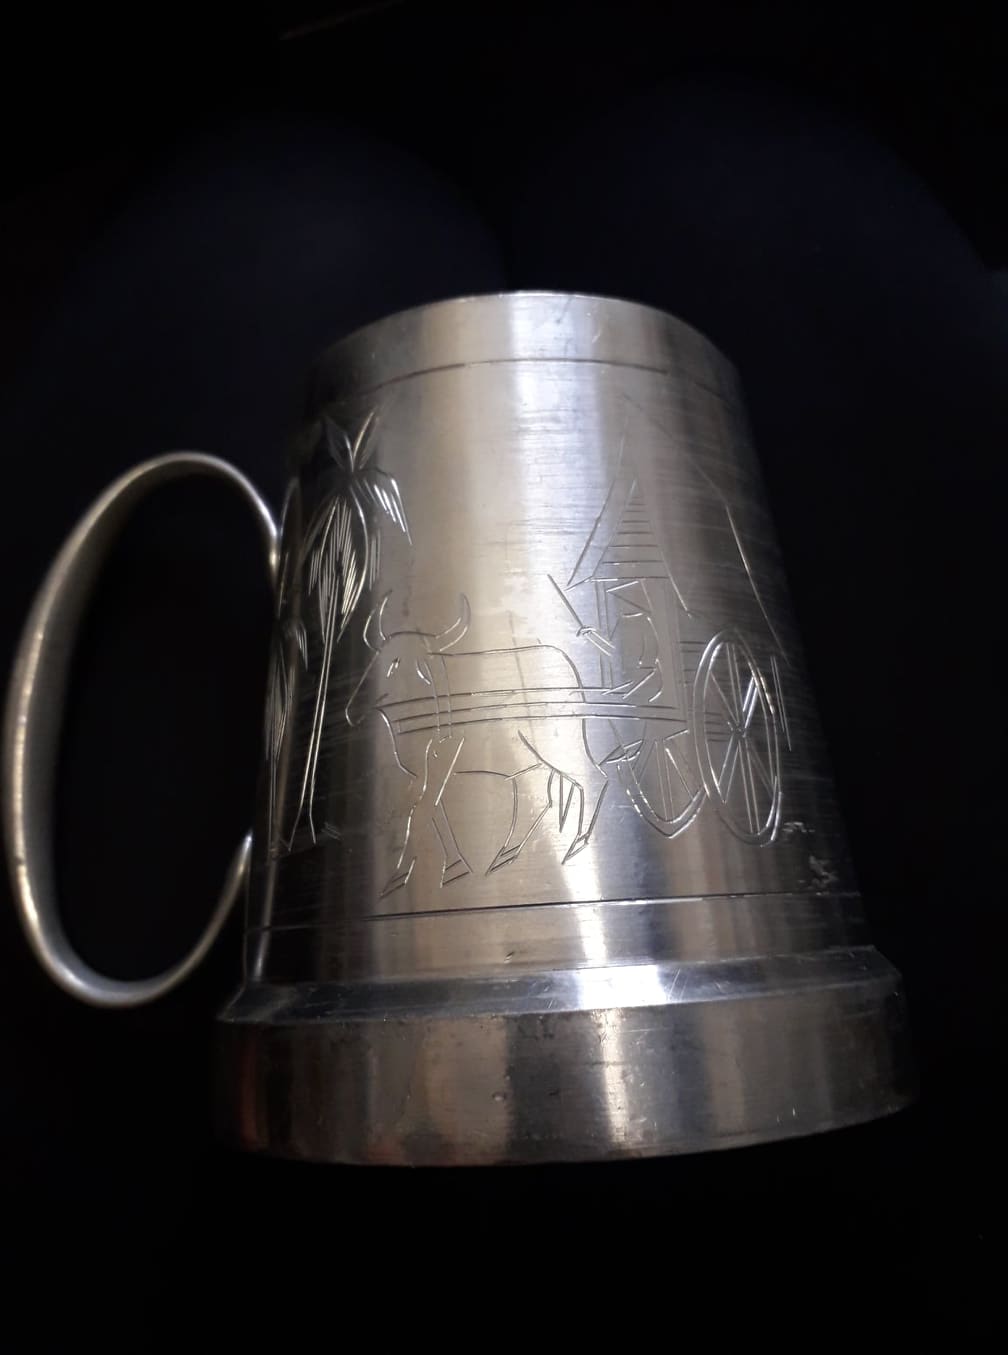 Tankards From Ebay And An Unexpected Story